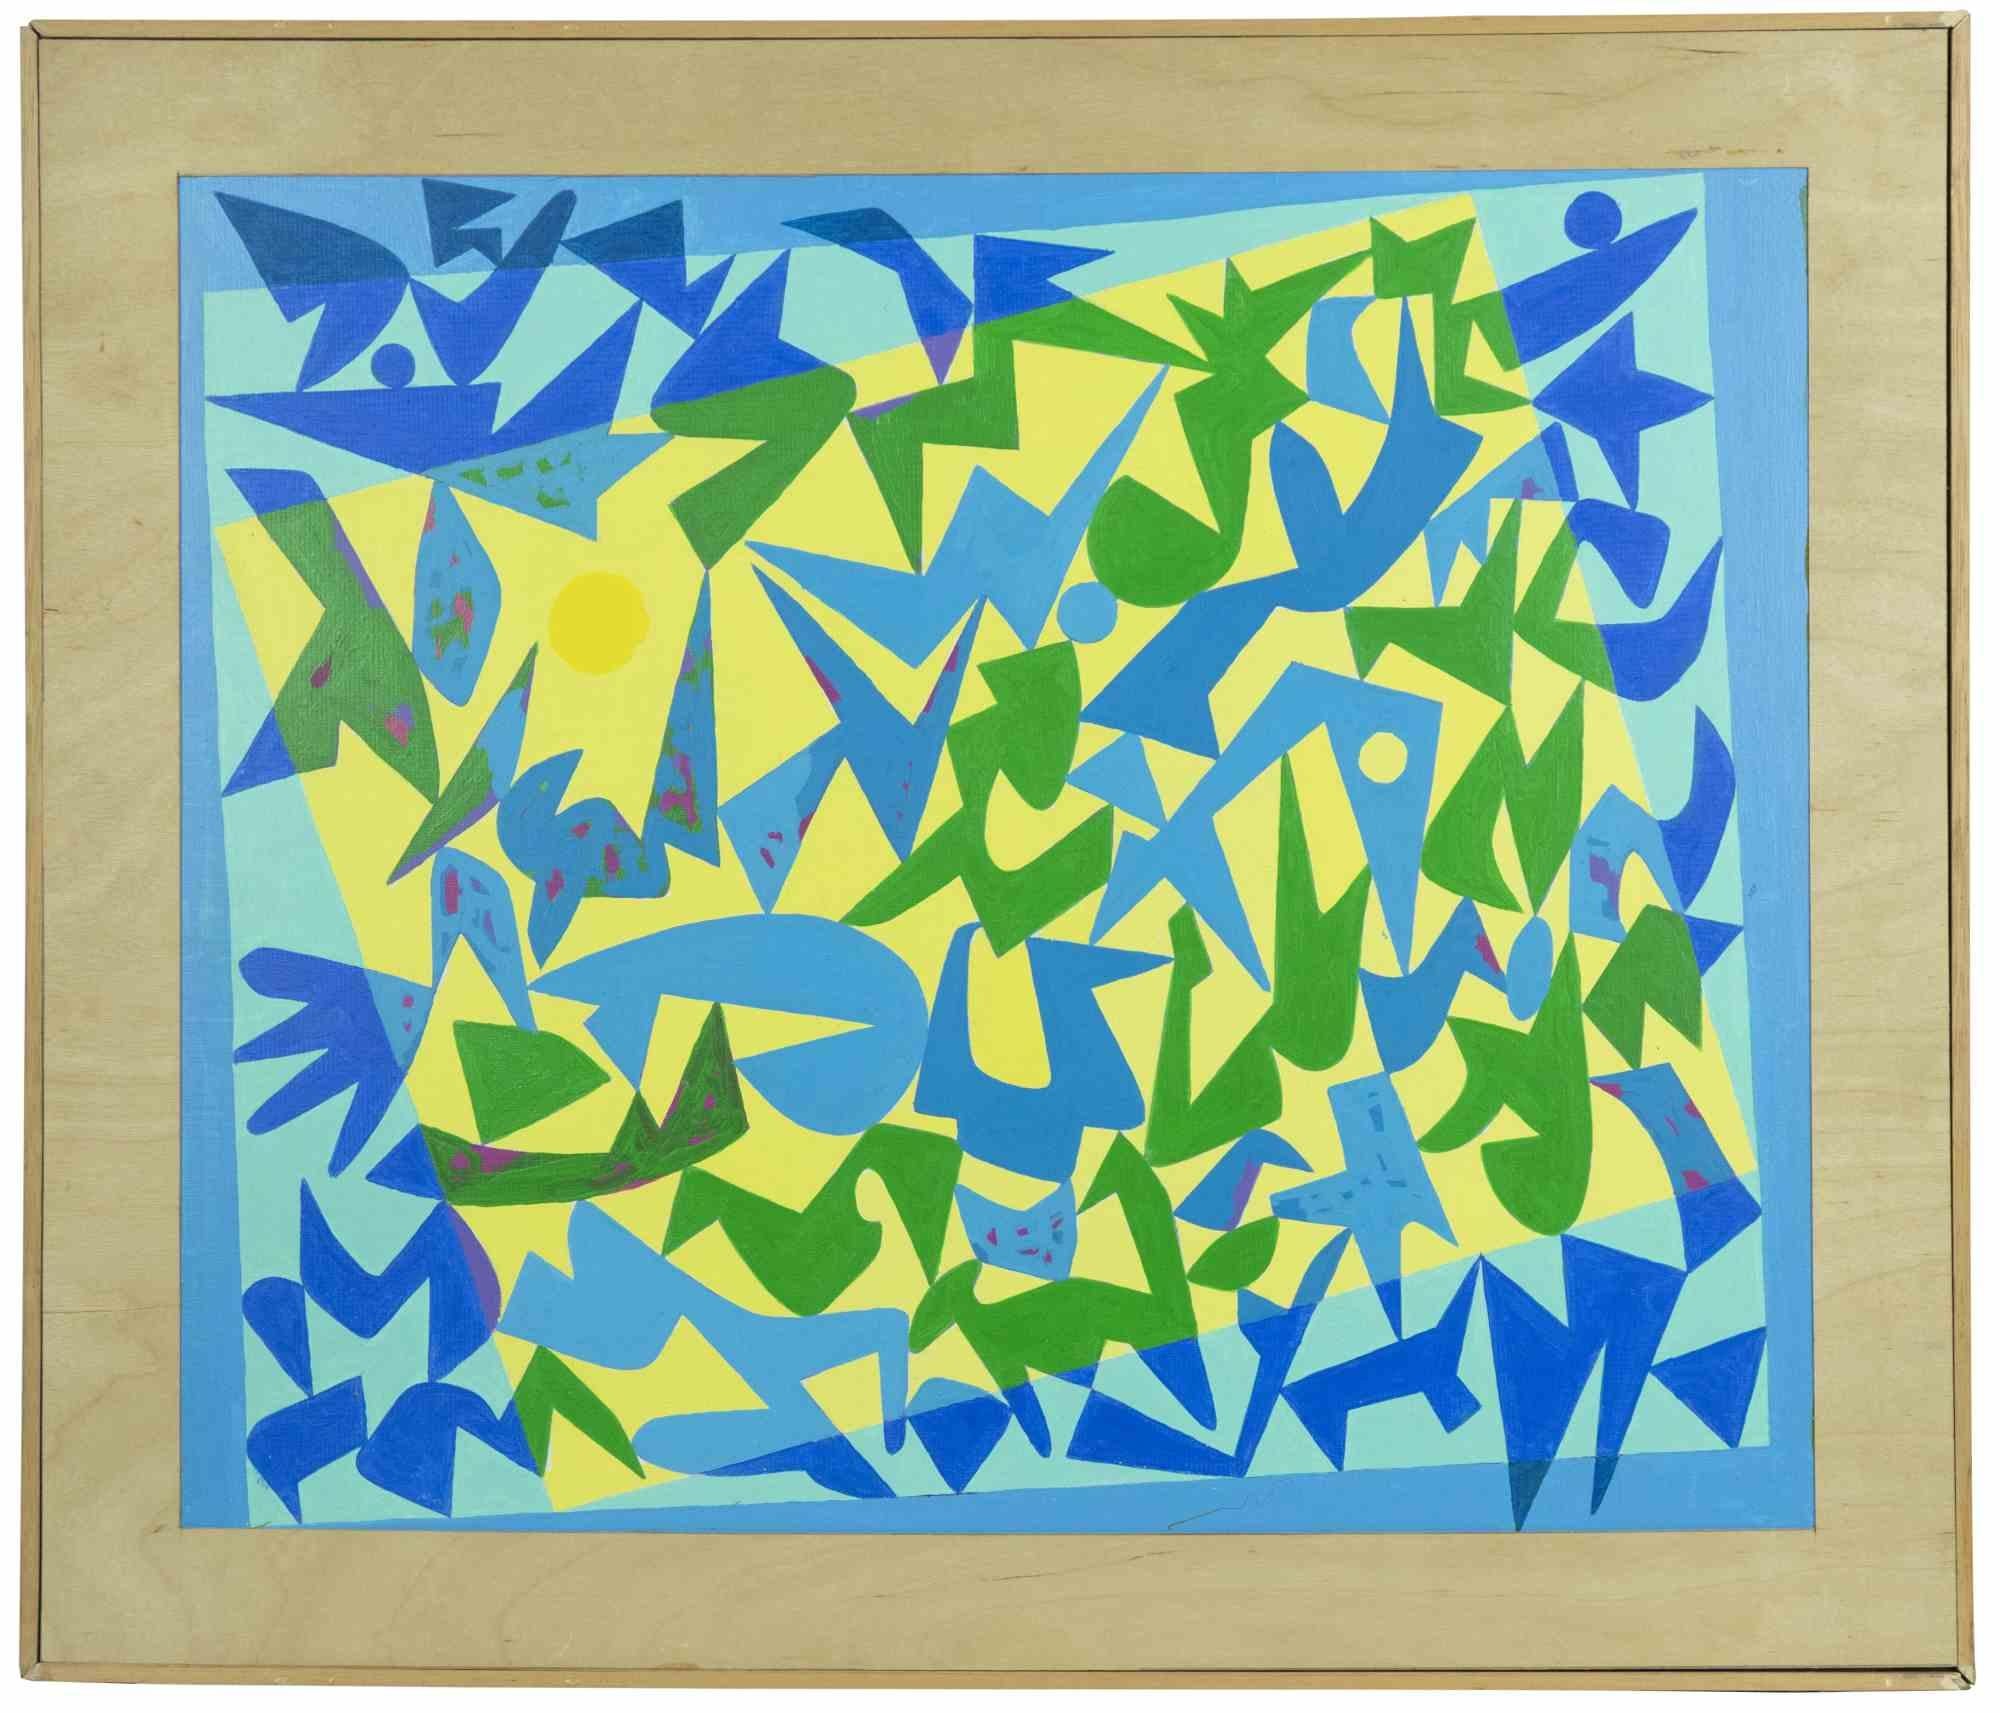 Abstract in yellow and blue is a contemporary artwork realized by Leo Guida in 1970s.

Mixed colored tempera painting on plywood.

Includes frame: 50 x 58 cm

Leo Guida  (1992 - 2017). Sensitive to current issues, artistic movements and historical